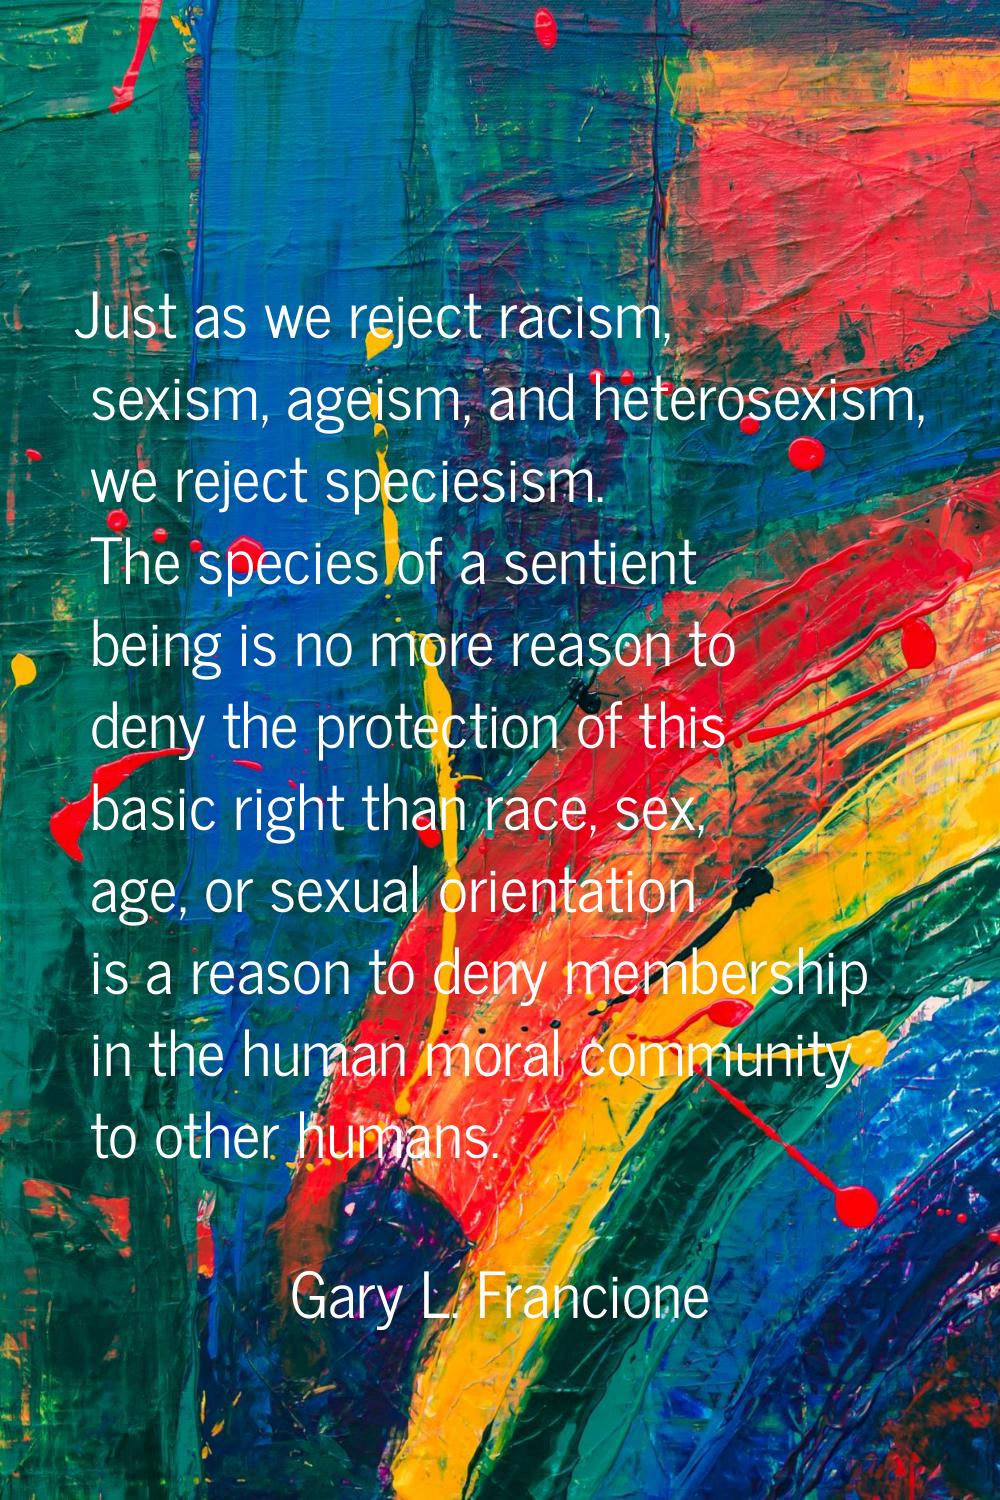 Just as we reject racism, sexism, ageism, and heterosexism, we reject speciesism. The species of a 